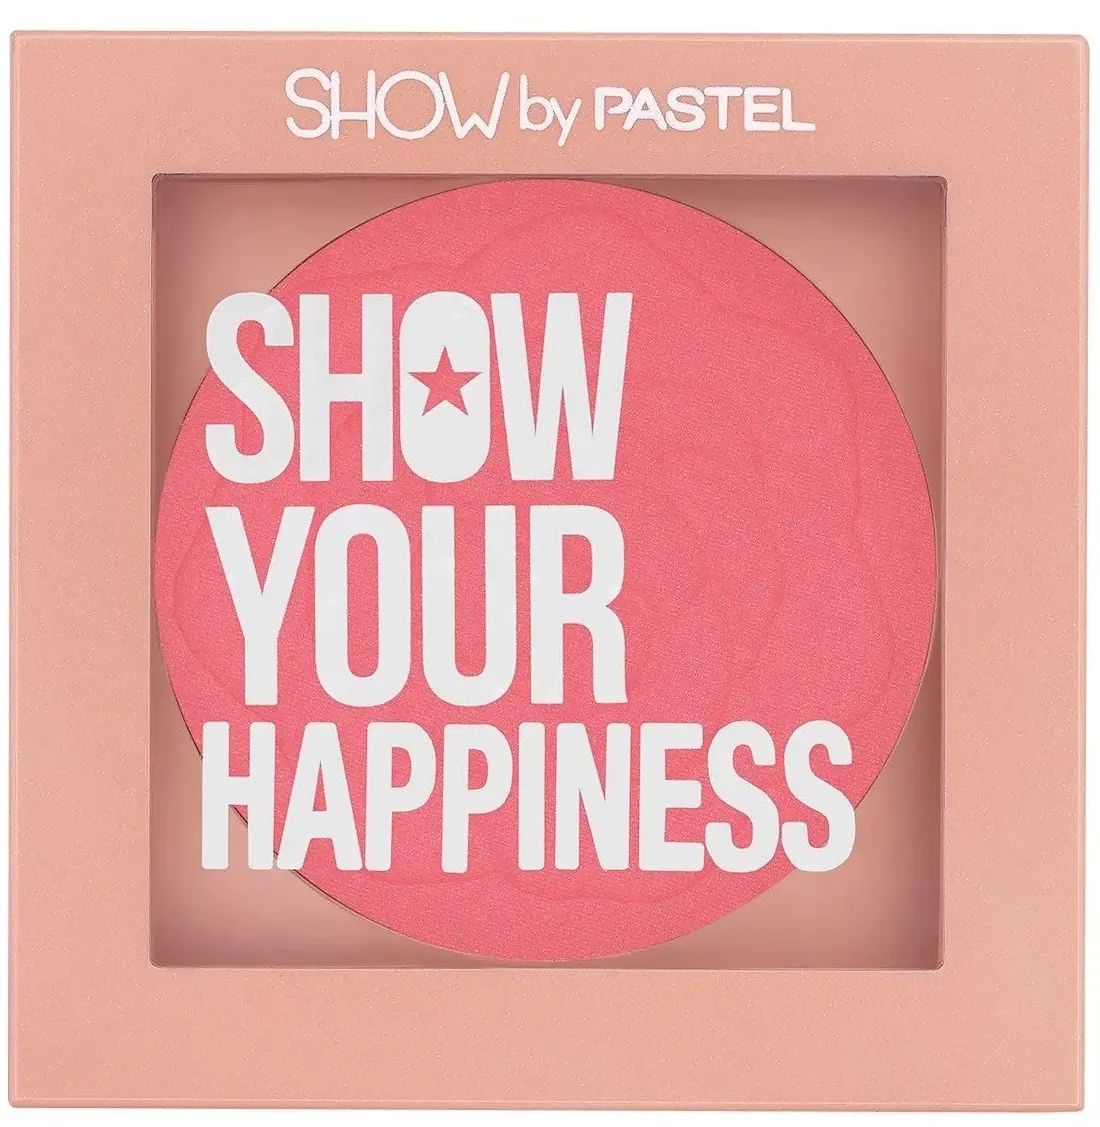 Румяна для лица Pastel Show Your Happiness Blush, 202 Colorful, 4,2 г the architecture of happiness